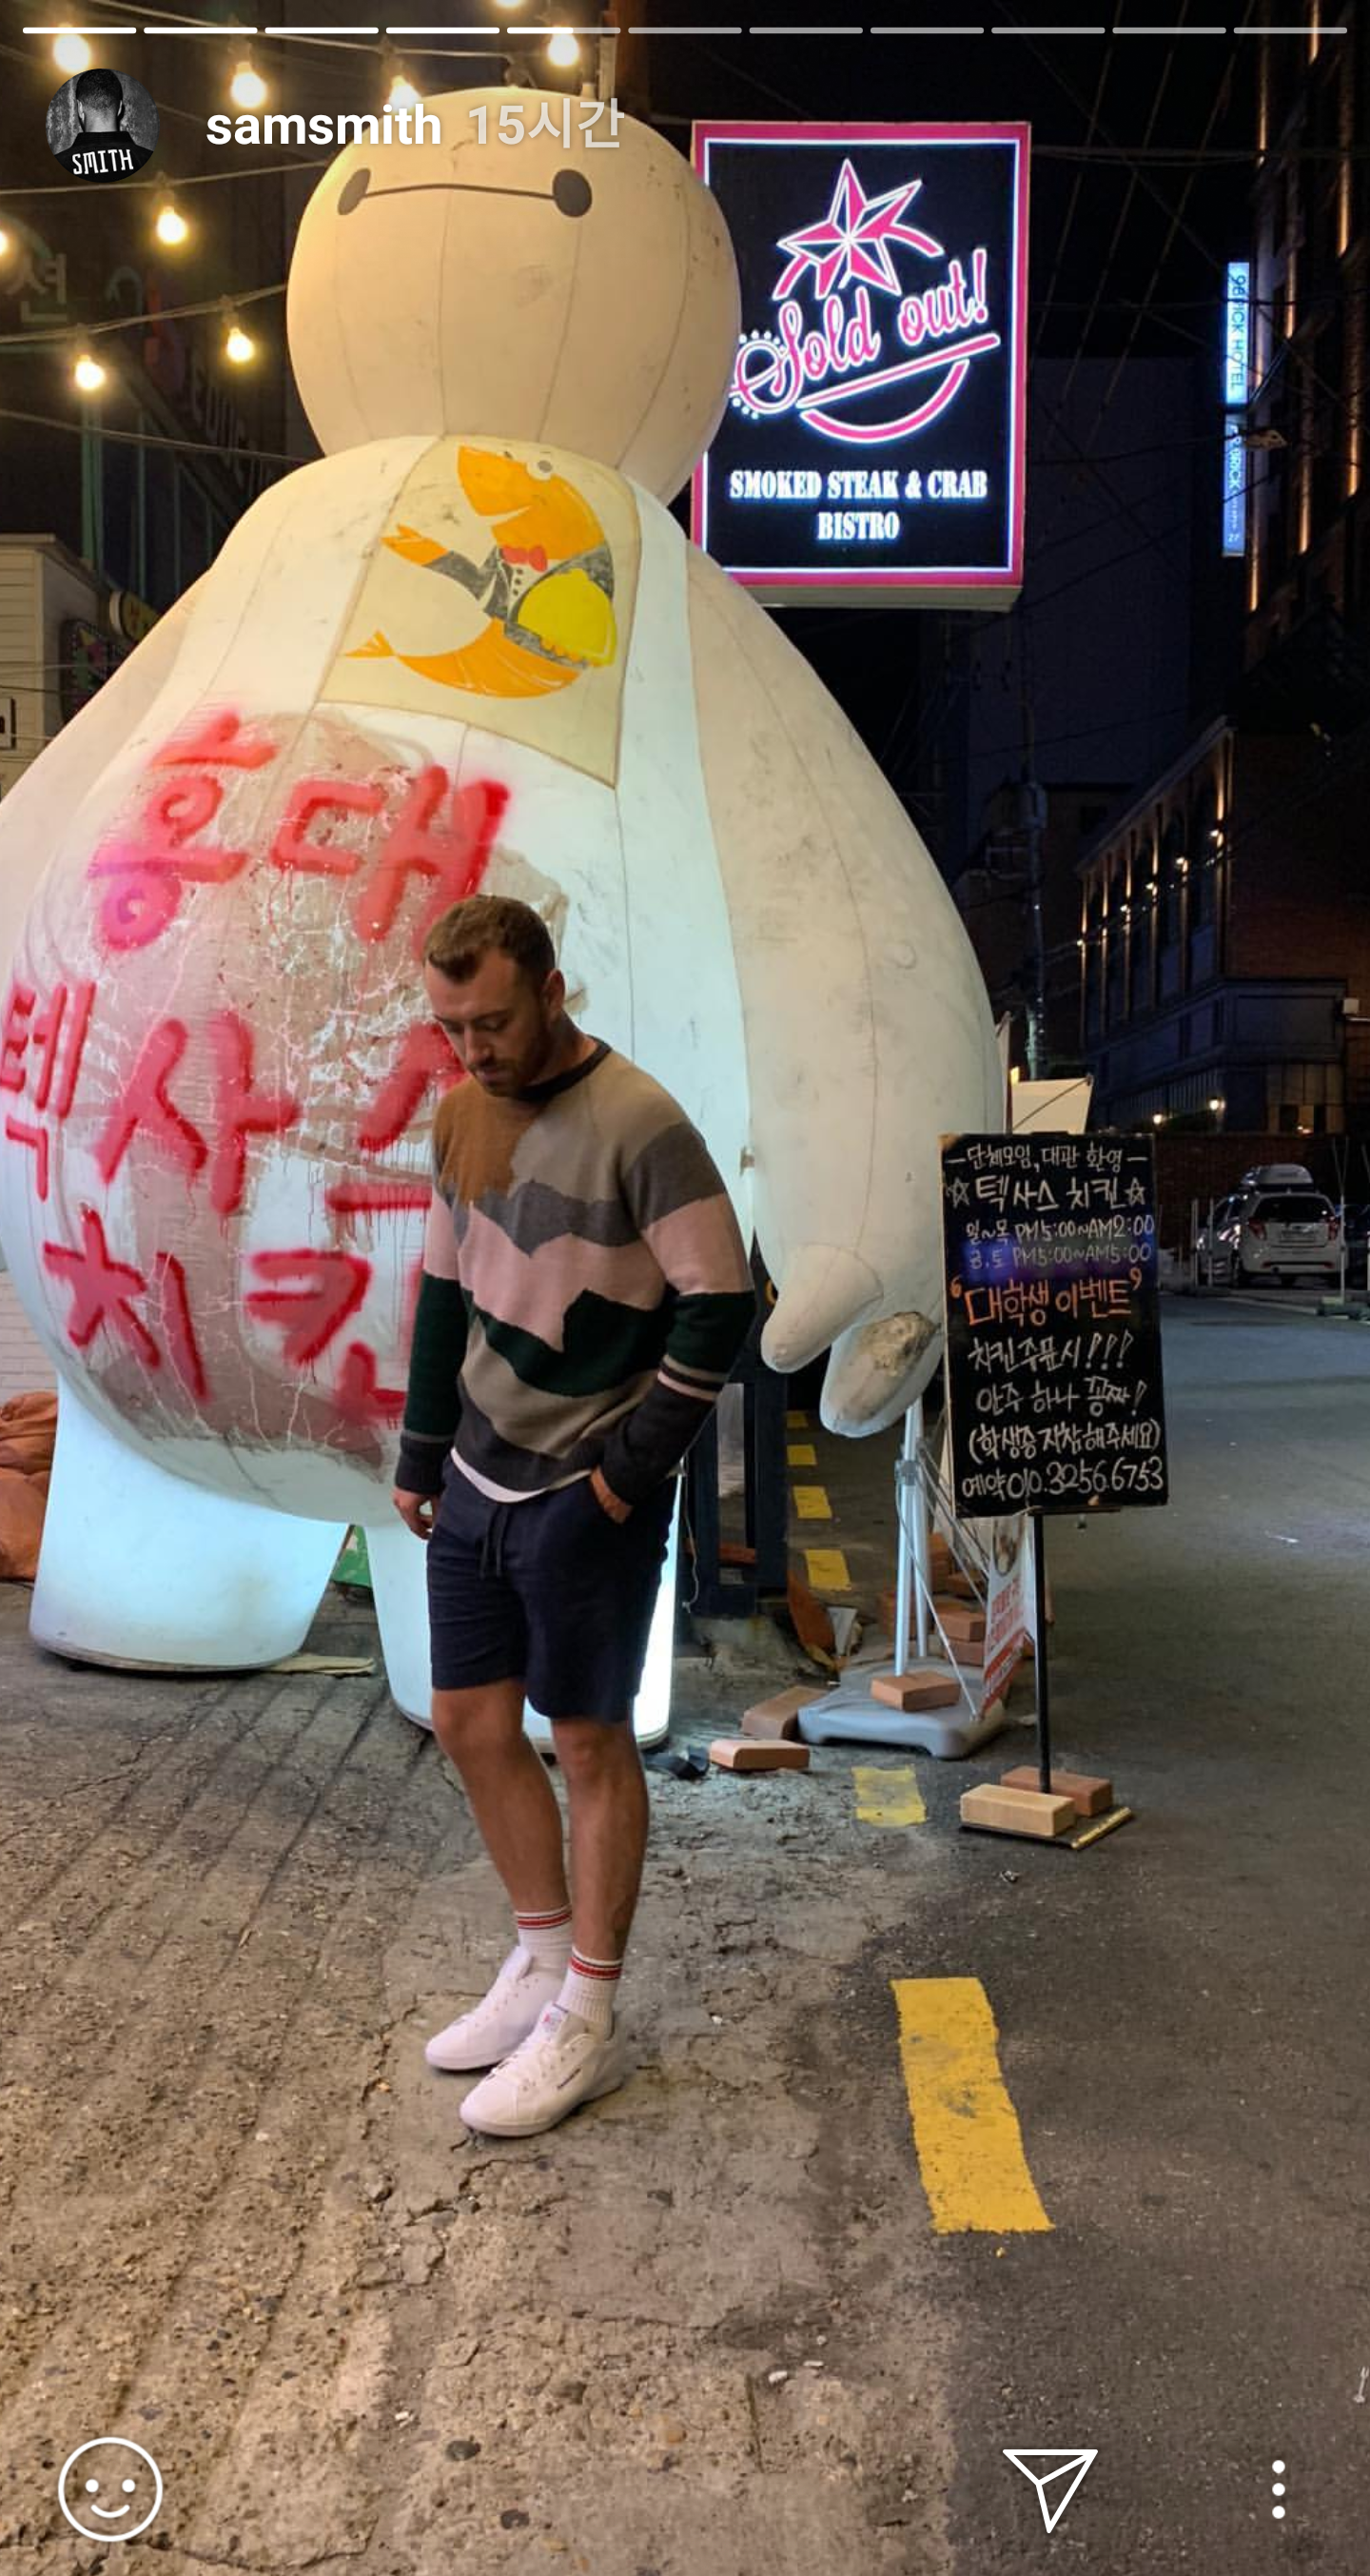 World pop star Sam Smyths, 26, is making headlines for his trip to Korea ahead of his first performance in Korea.Sam Smyths posted several photos and videos on his Instagram story on Saturday in the city center of Seoul.His posts included traditional parade videos on Insa-dong traditional cultural streets and pictures of egg bread, a street food.She also posted videos and dog-bug photos of eating Sundae and mountain octopus at a stall, as well as photos of her wearing sunglasses and masks and setting up Gyeongbokgung on Instagram.Earlier, the day before, I posted a selfie taken at Hongdae, and a new tattooed video in Korea was also posted.Sam Smyths will hold his first Elie Goulding at the Gocheok Sky Dome in Guro-gu, Seoul on the 9th through Hyundai Card Super Concert 23 and meet Korean fans.Sam Smyths, a British native, appeared in spectacular fashion with his debut album In the Lonely Hour in 2014.The album sold more than 12 million copies in the former World.In 2015, he won four awards, including Song of the Year and Album of the Year, at the 57th Grammy Awards, and became a world-class musician with the support of the public and critics.